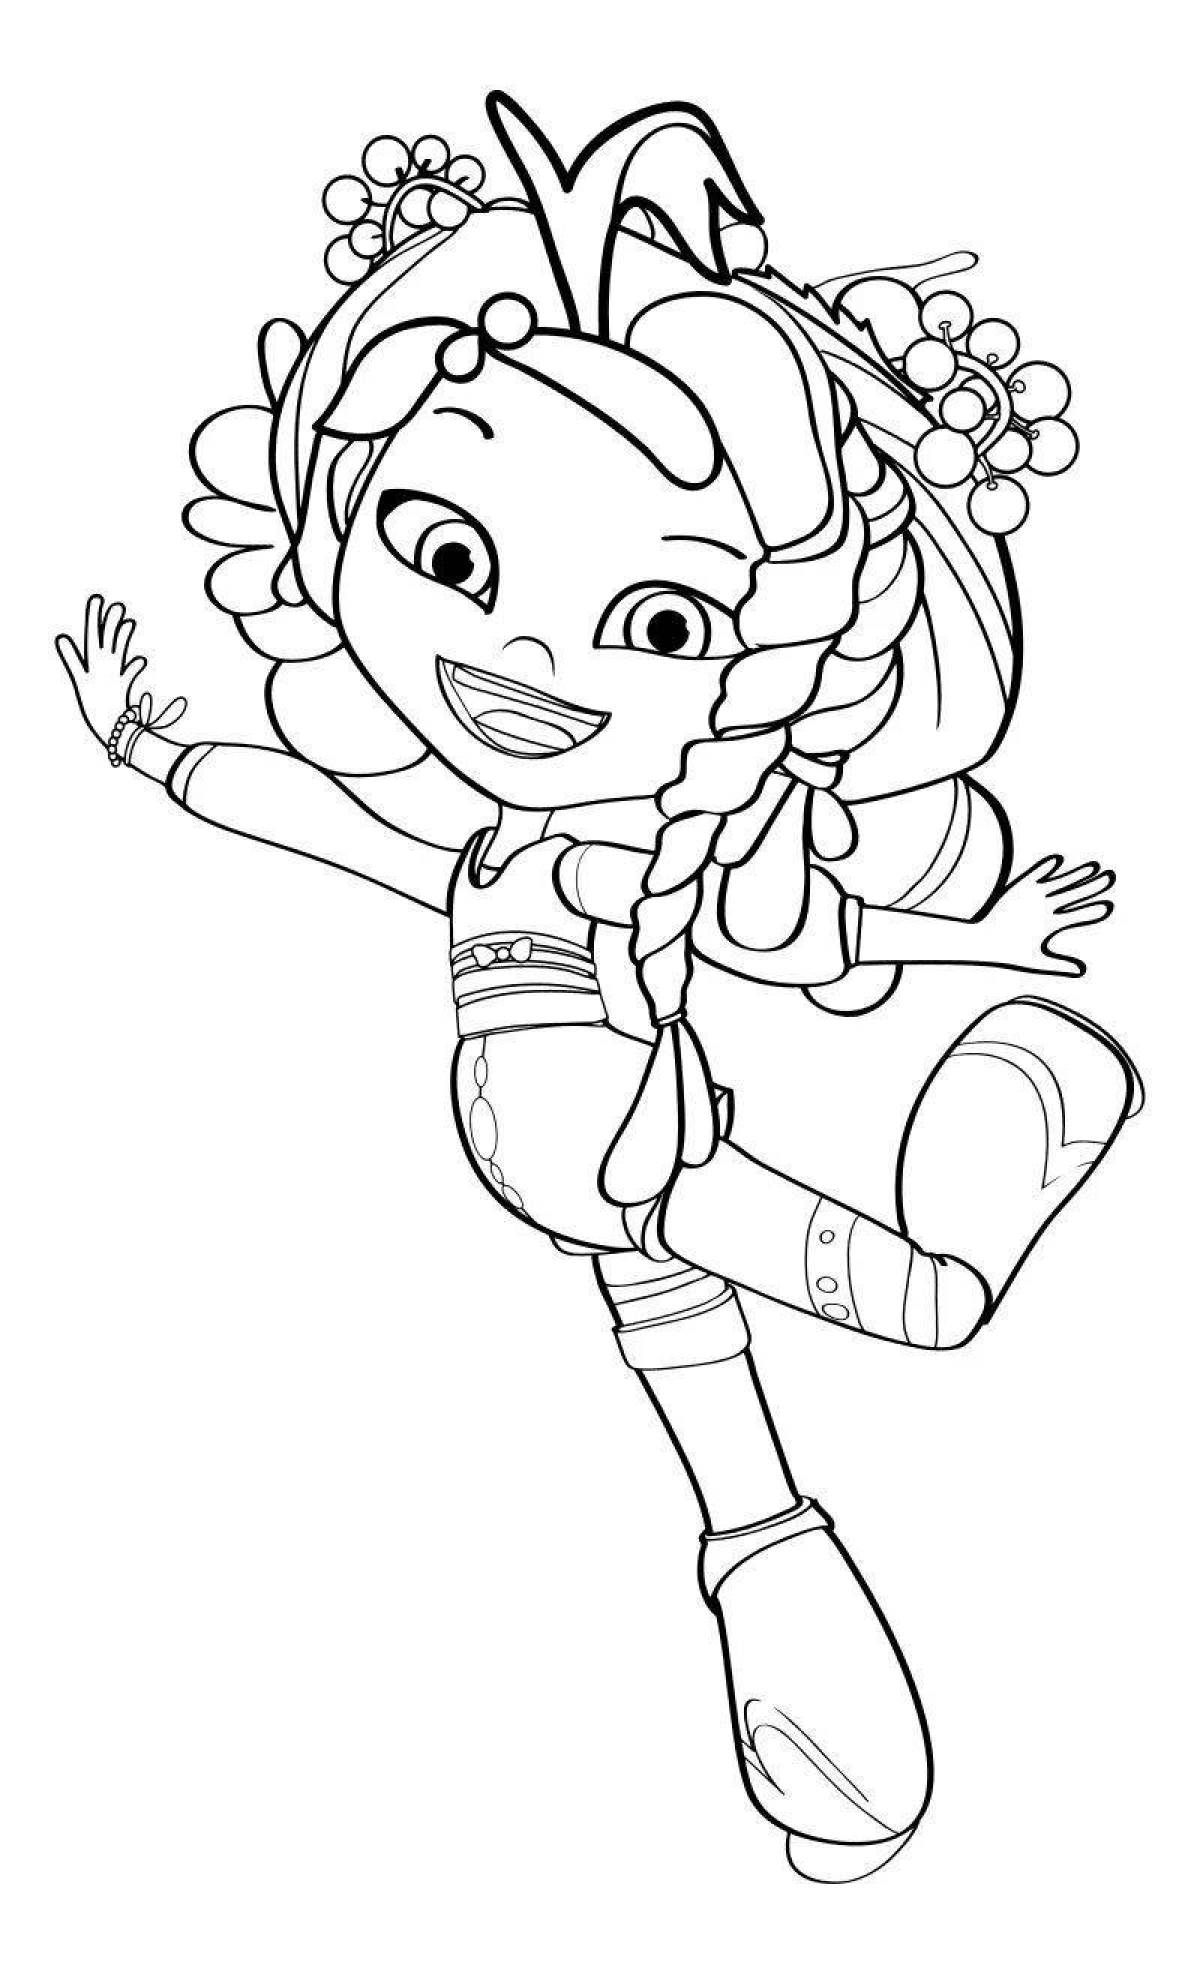 Coloring page serendipitous turn on the fairy patrol